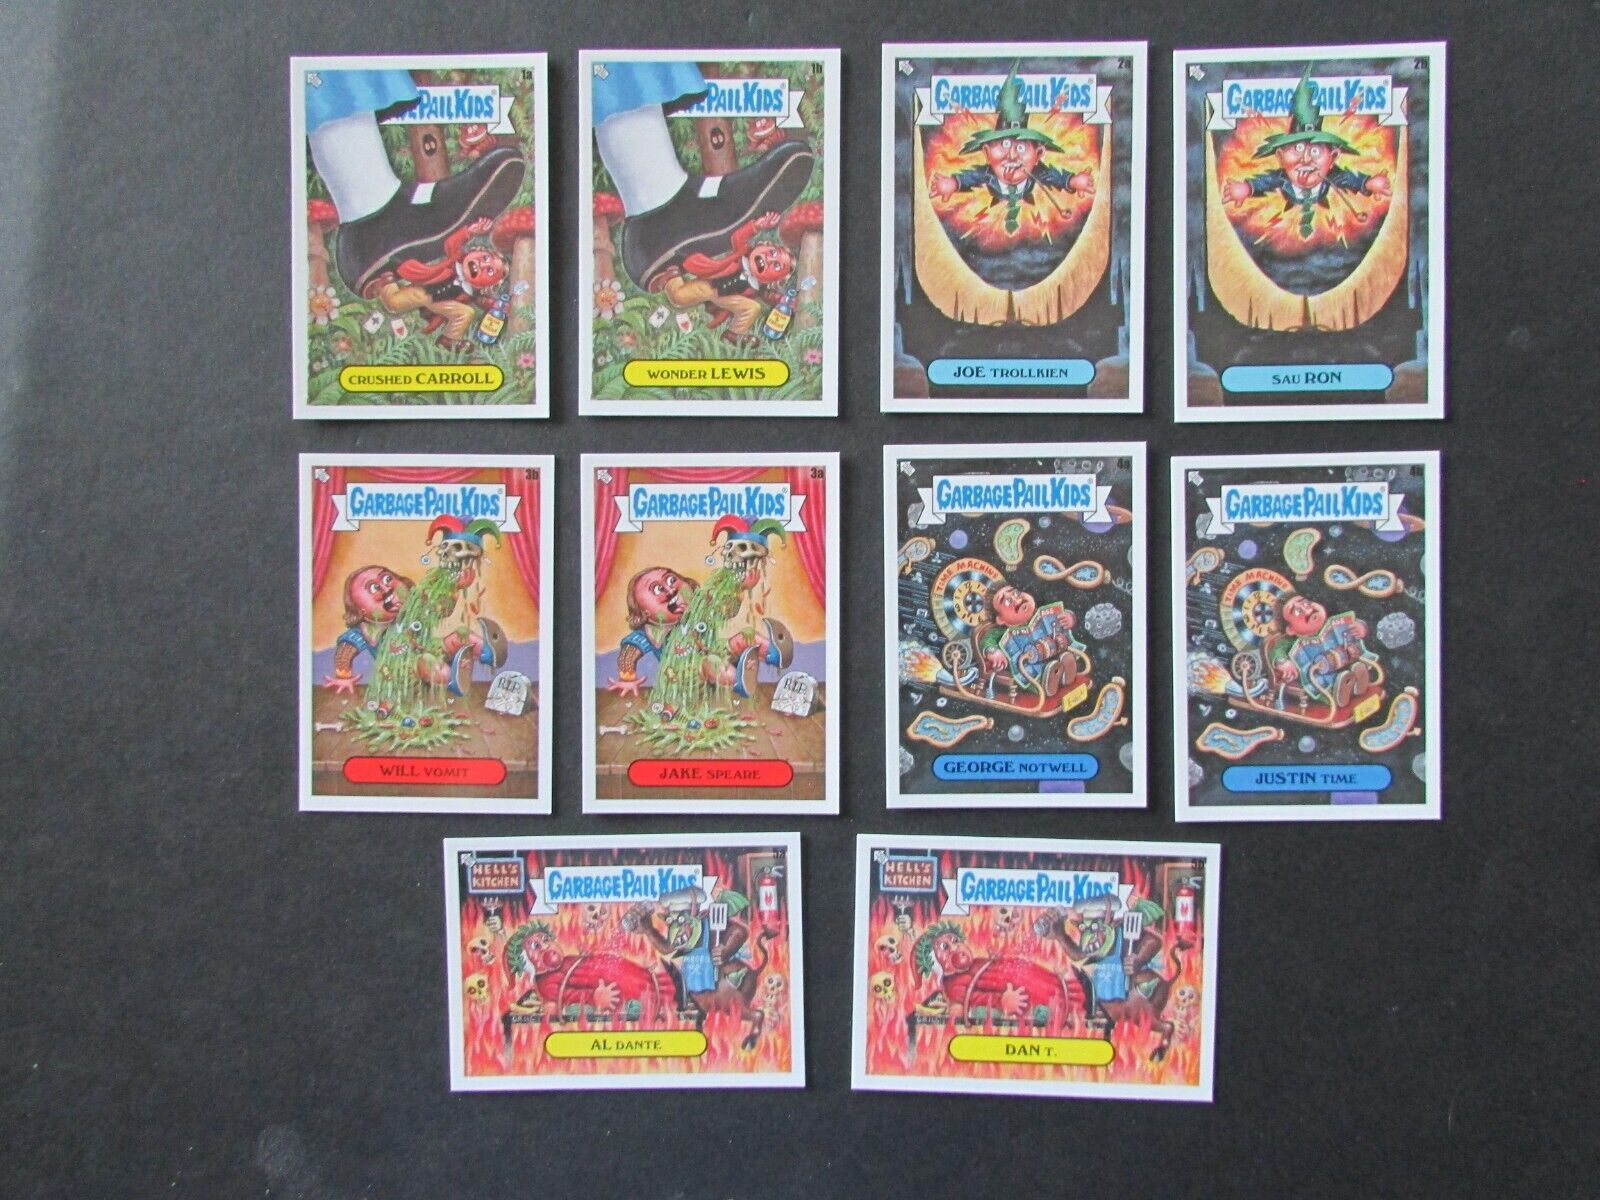 2022 Topps Garbage Pail Kids Series 1 Book Worms Authors of their Misfortune Set